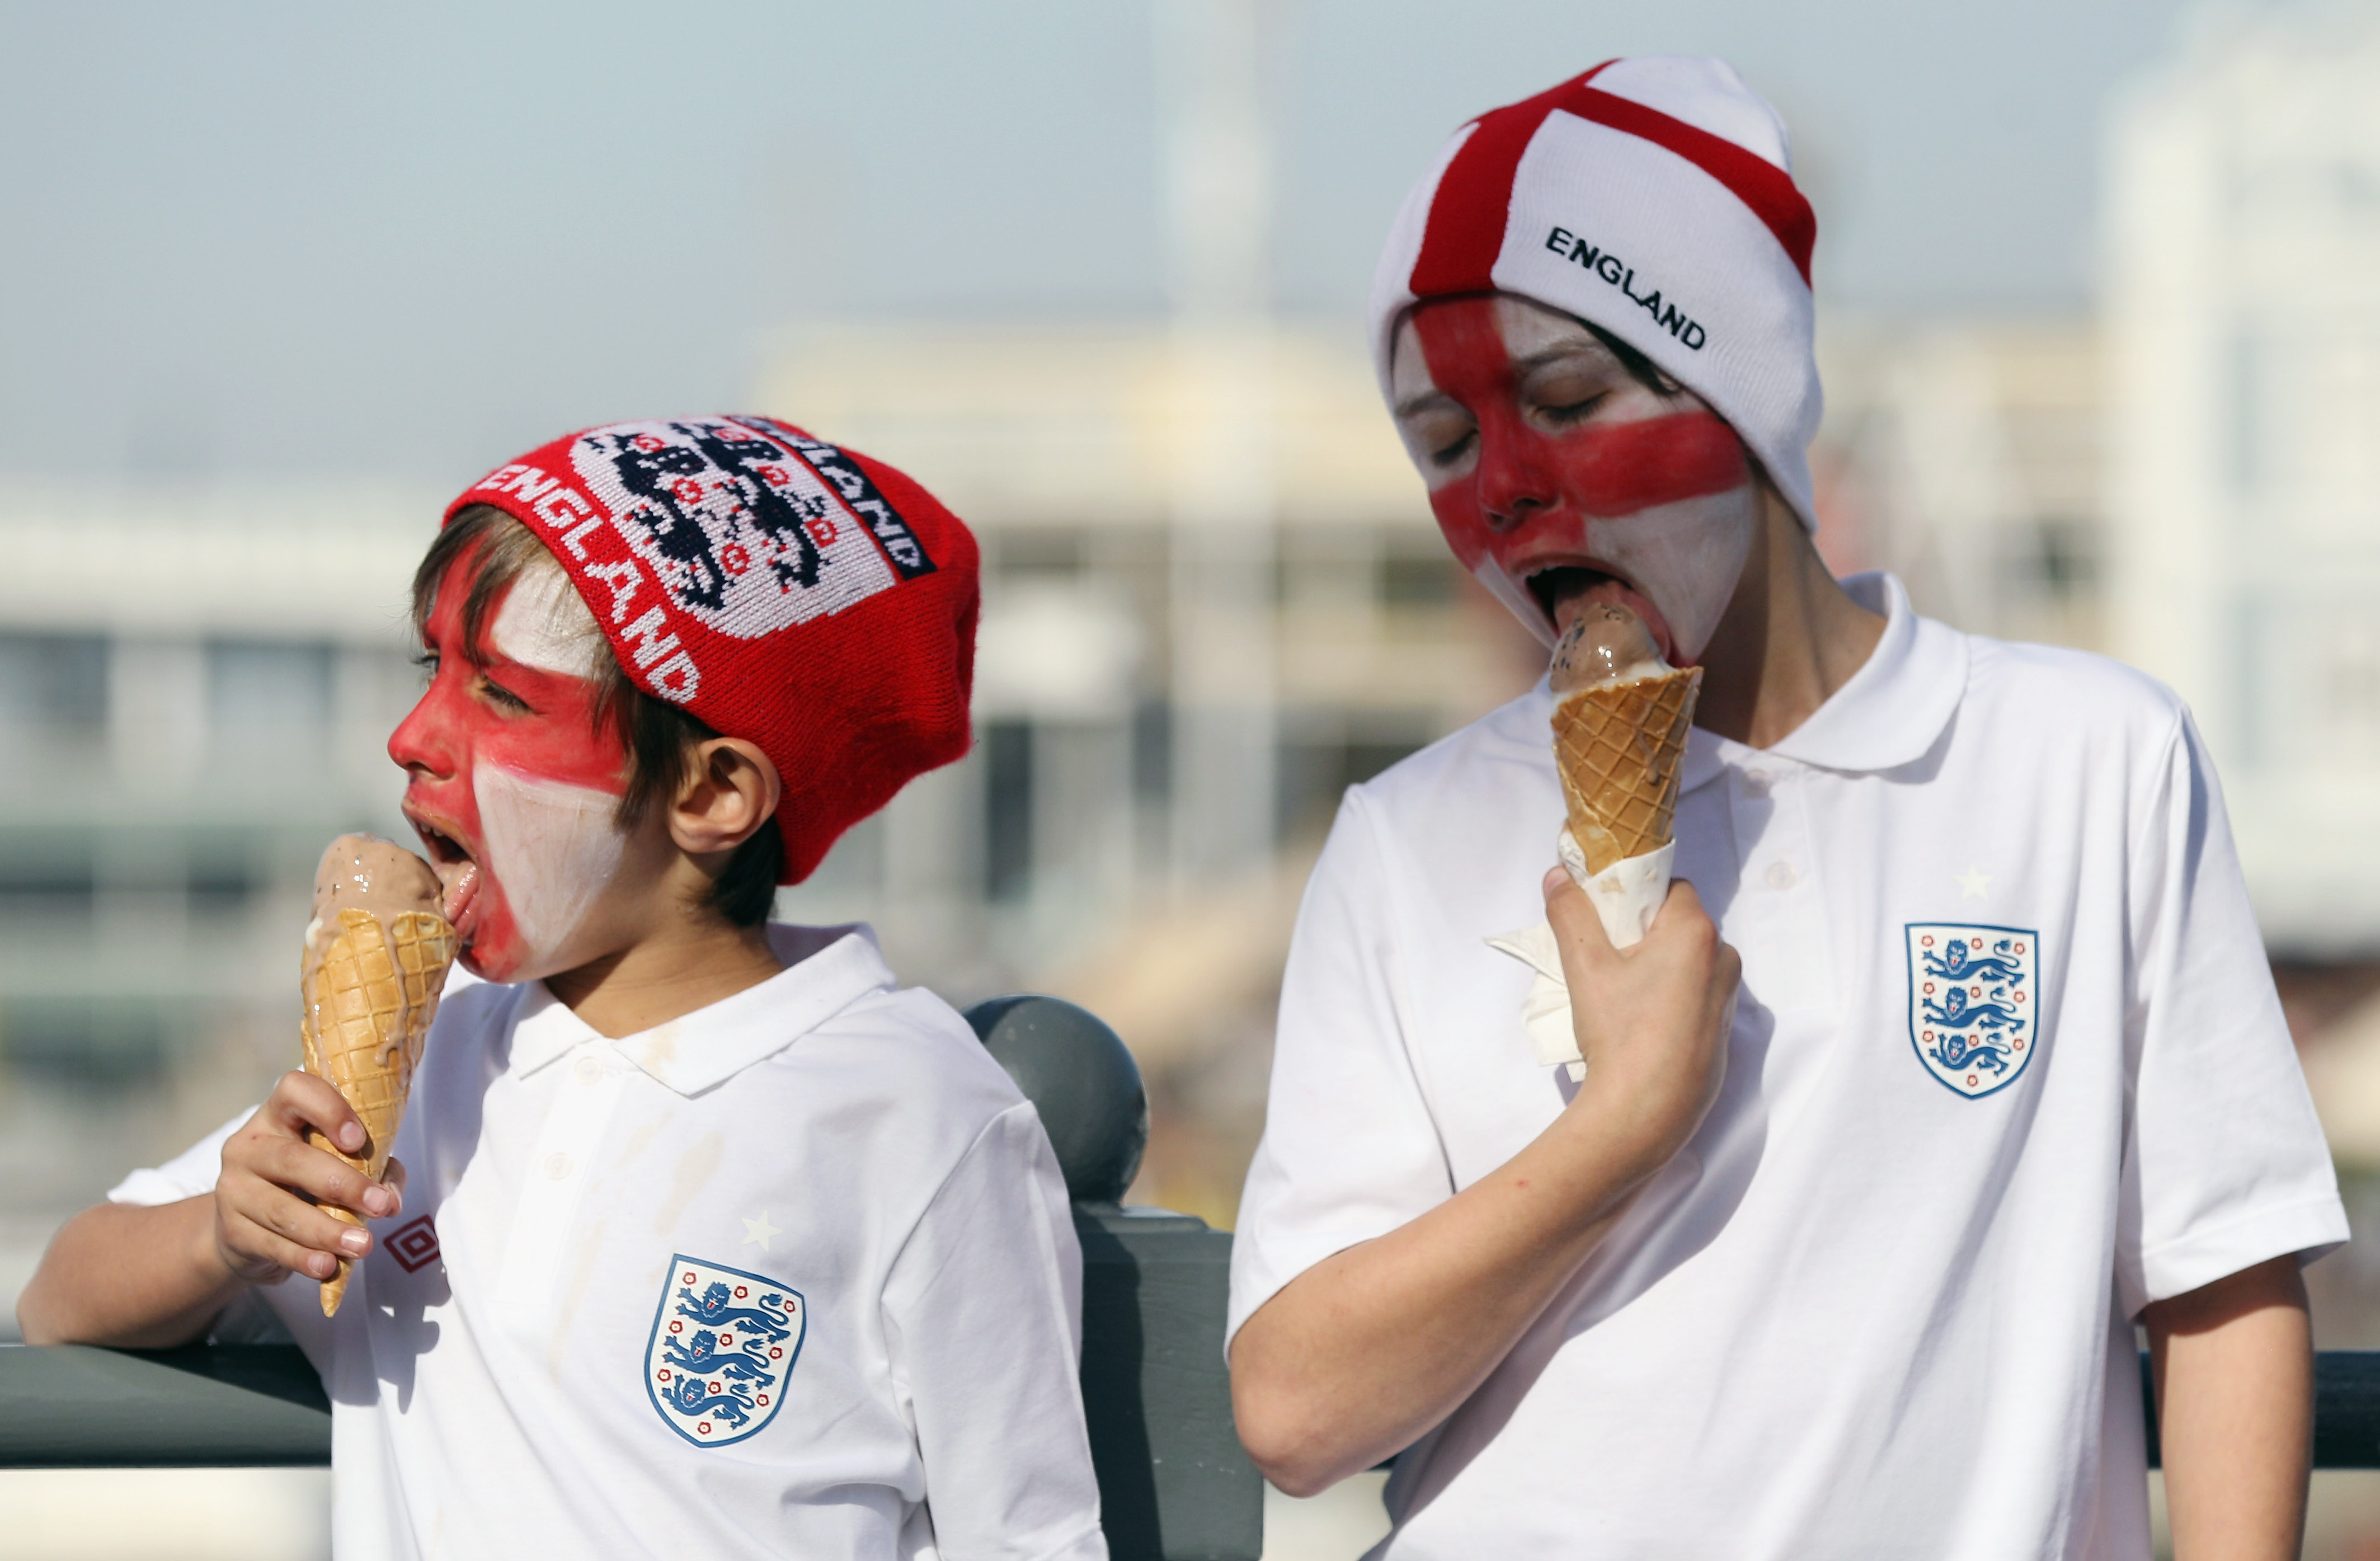 CAPE TOWN, SOUTH AFRICA - JUNE 18:  Two young England football supporters eat ice creams on the Waterfront on June 18, 2010 in Cape Town, South Africa. Cape Town hosts the match between England and Algeria tonight in the second of their group stage matche